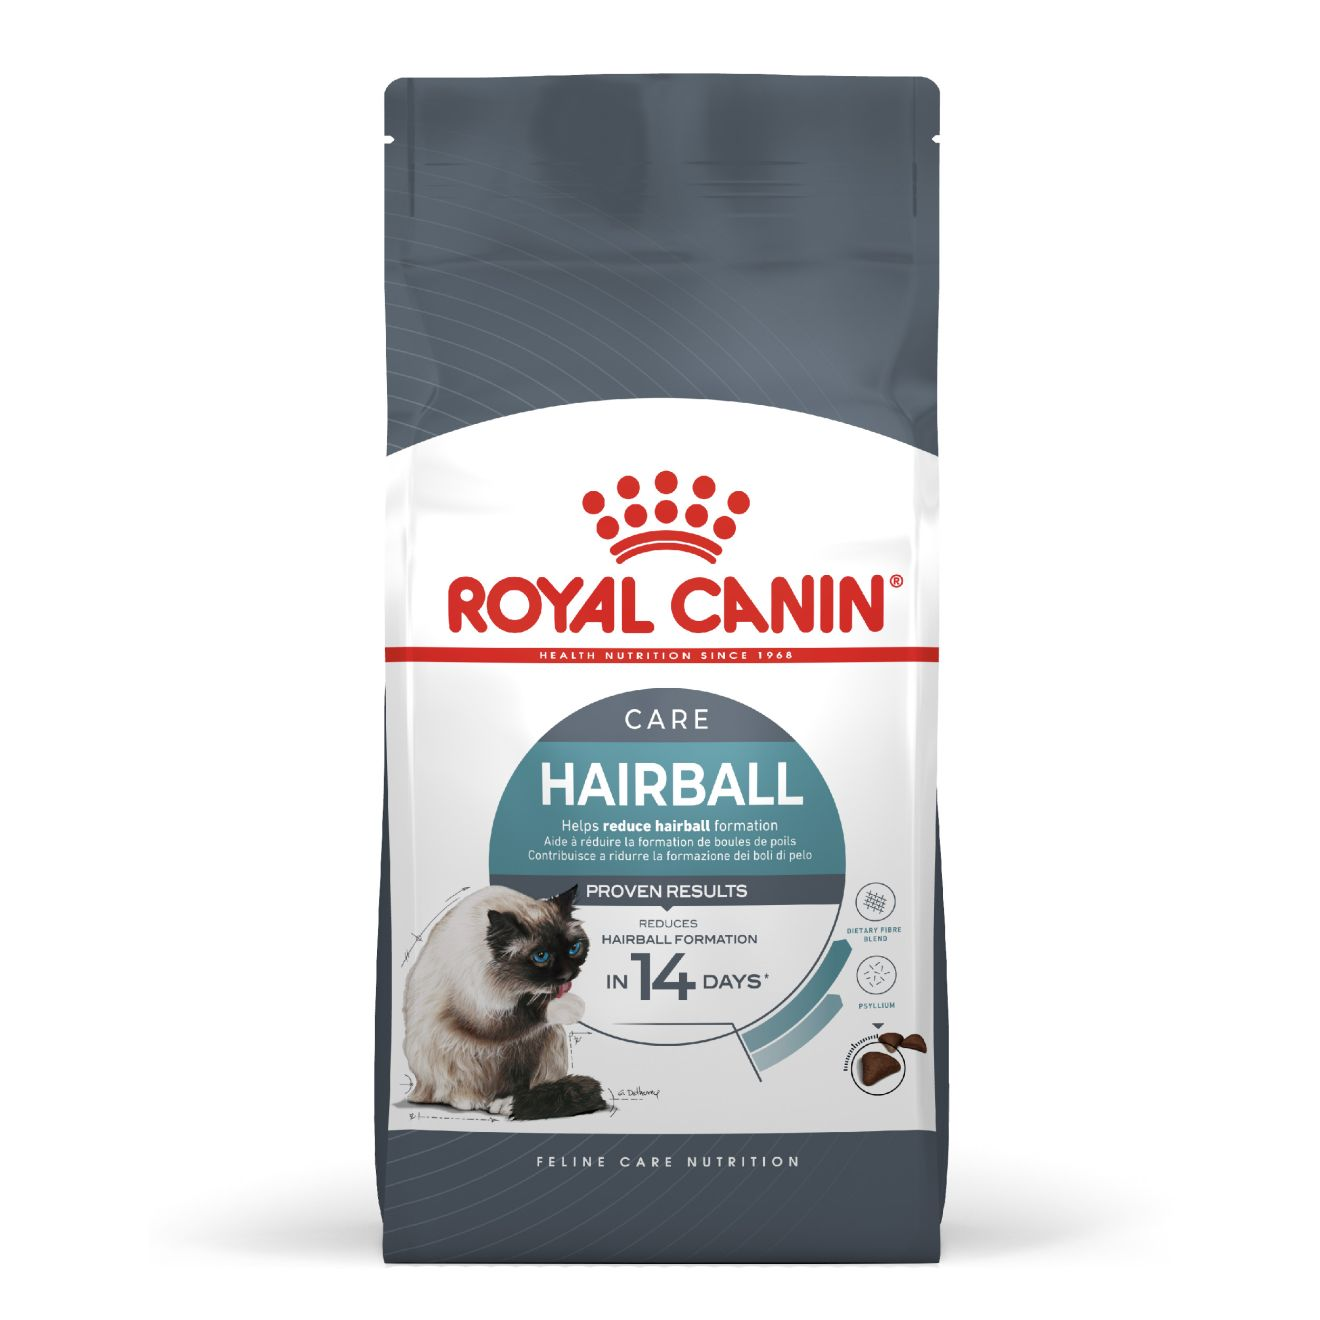 HAIRBALL CARE Dry Cat Food